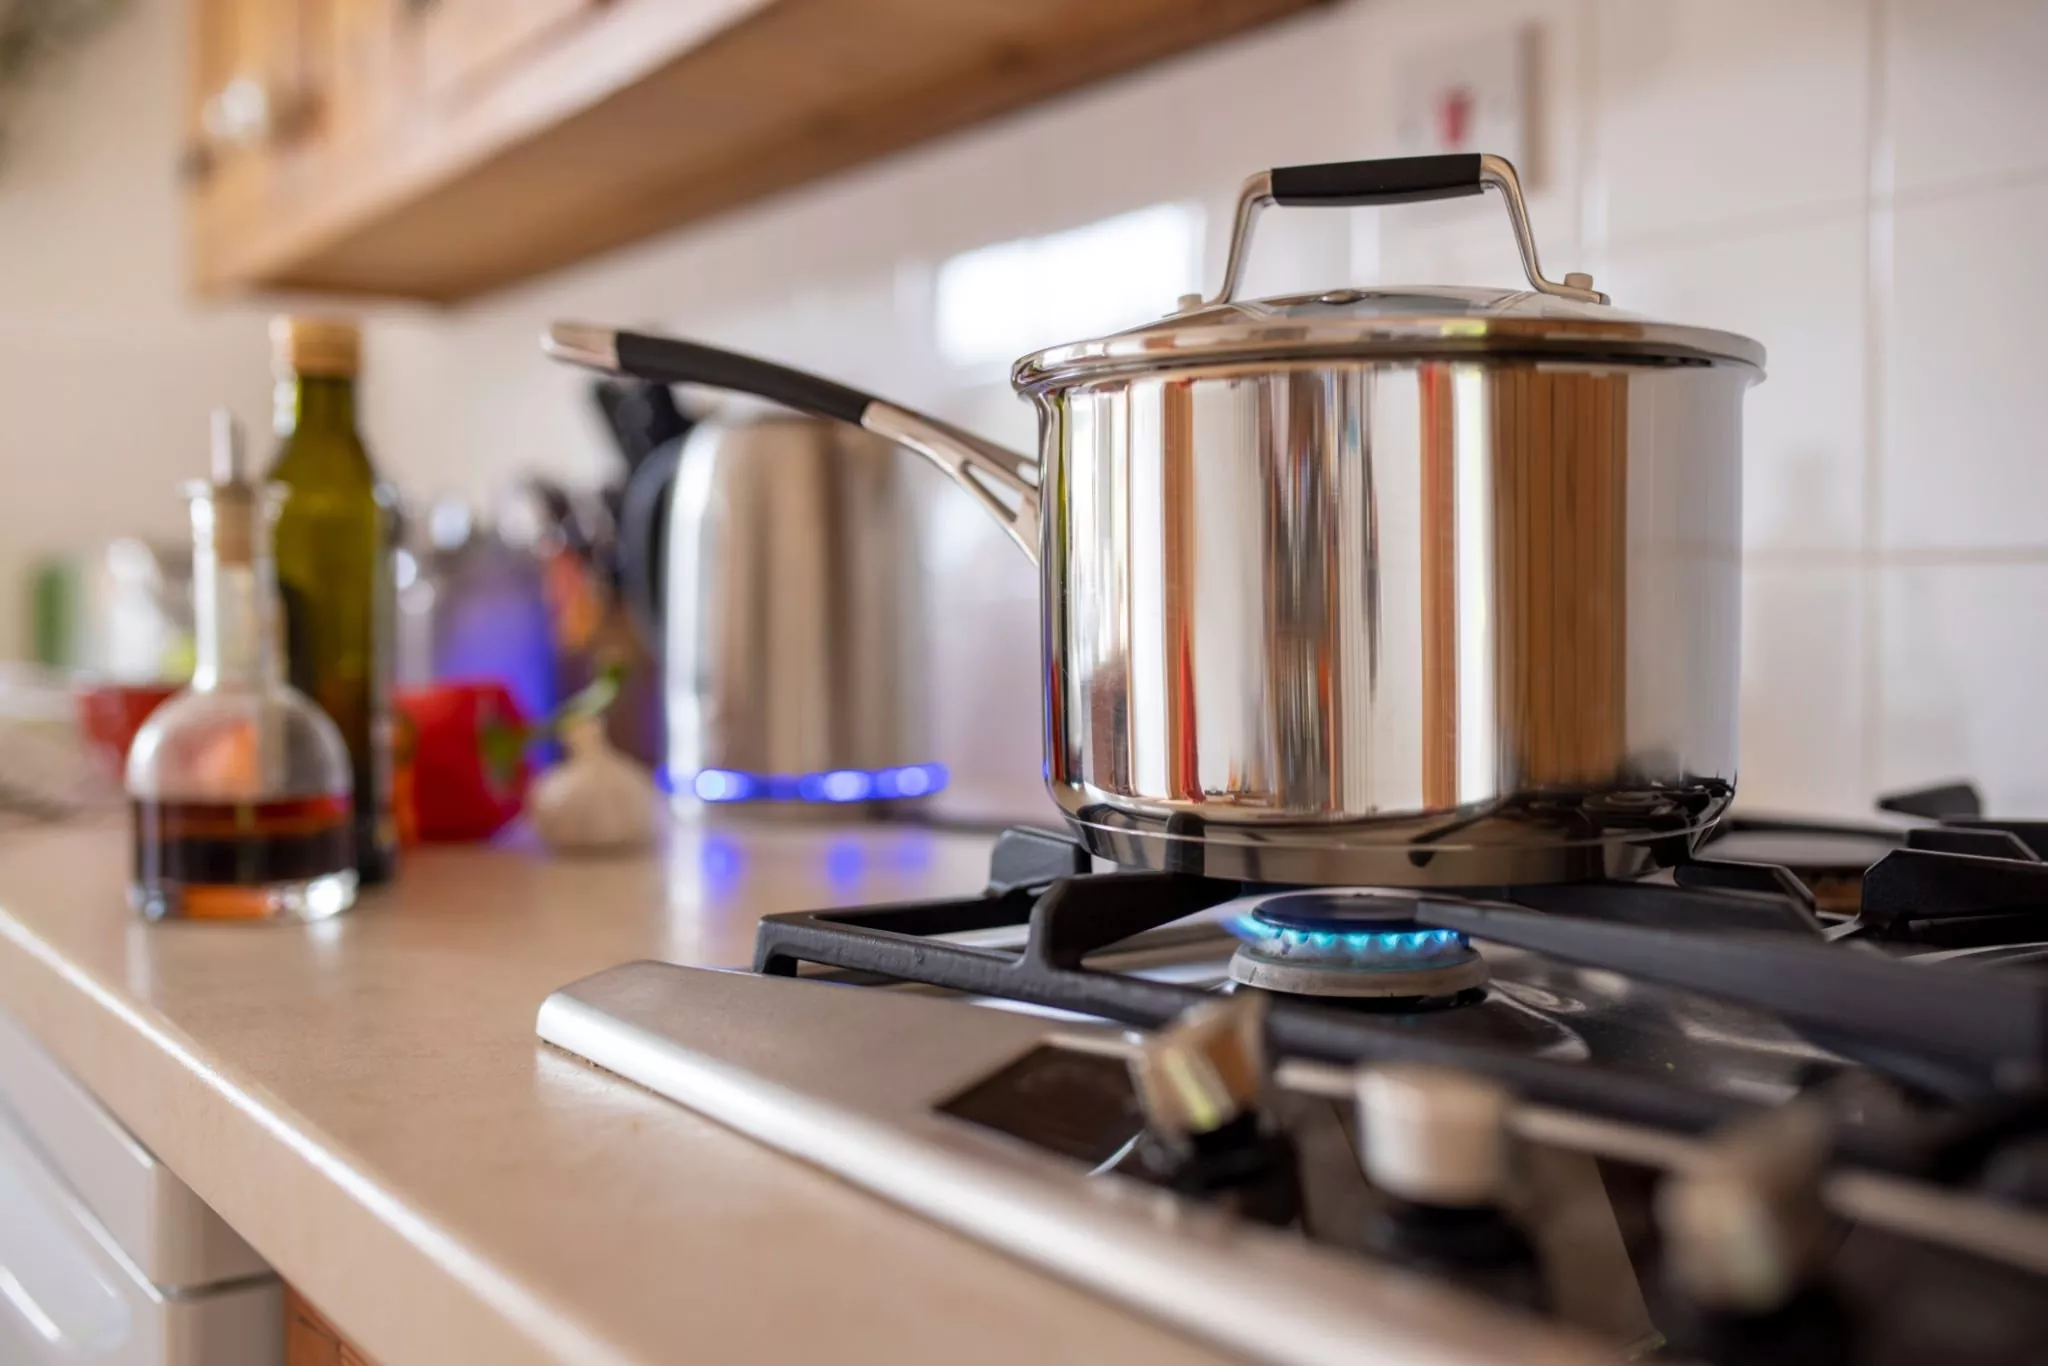 Experts On Gas Stove Alternatives And Reasons To Make The Switch